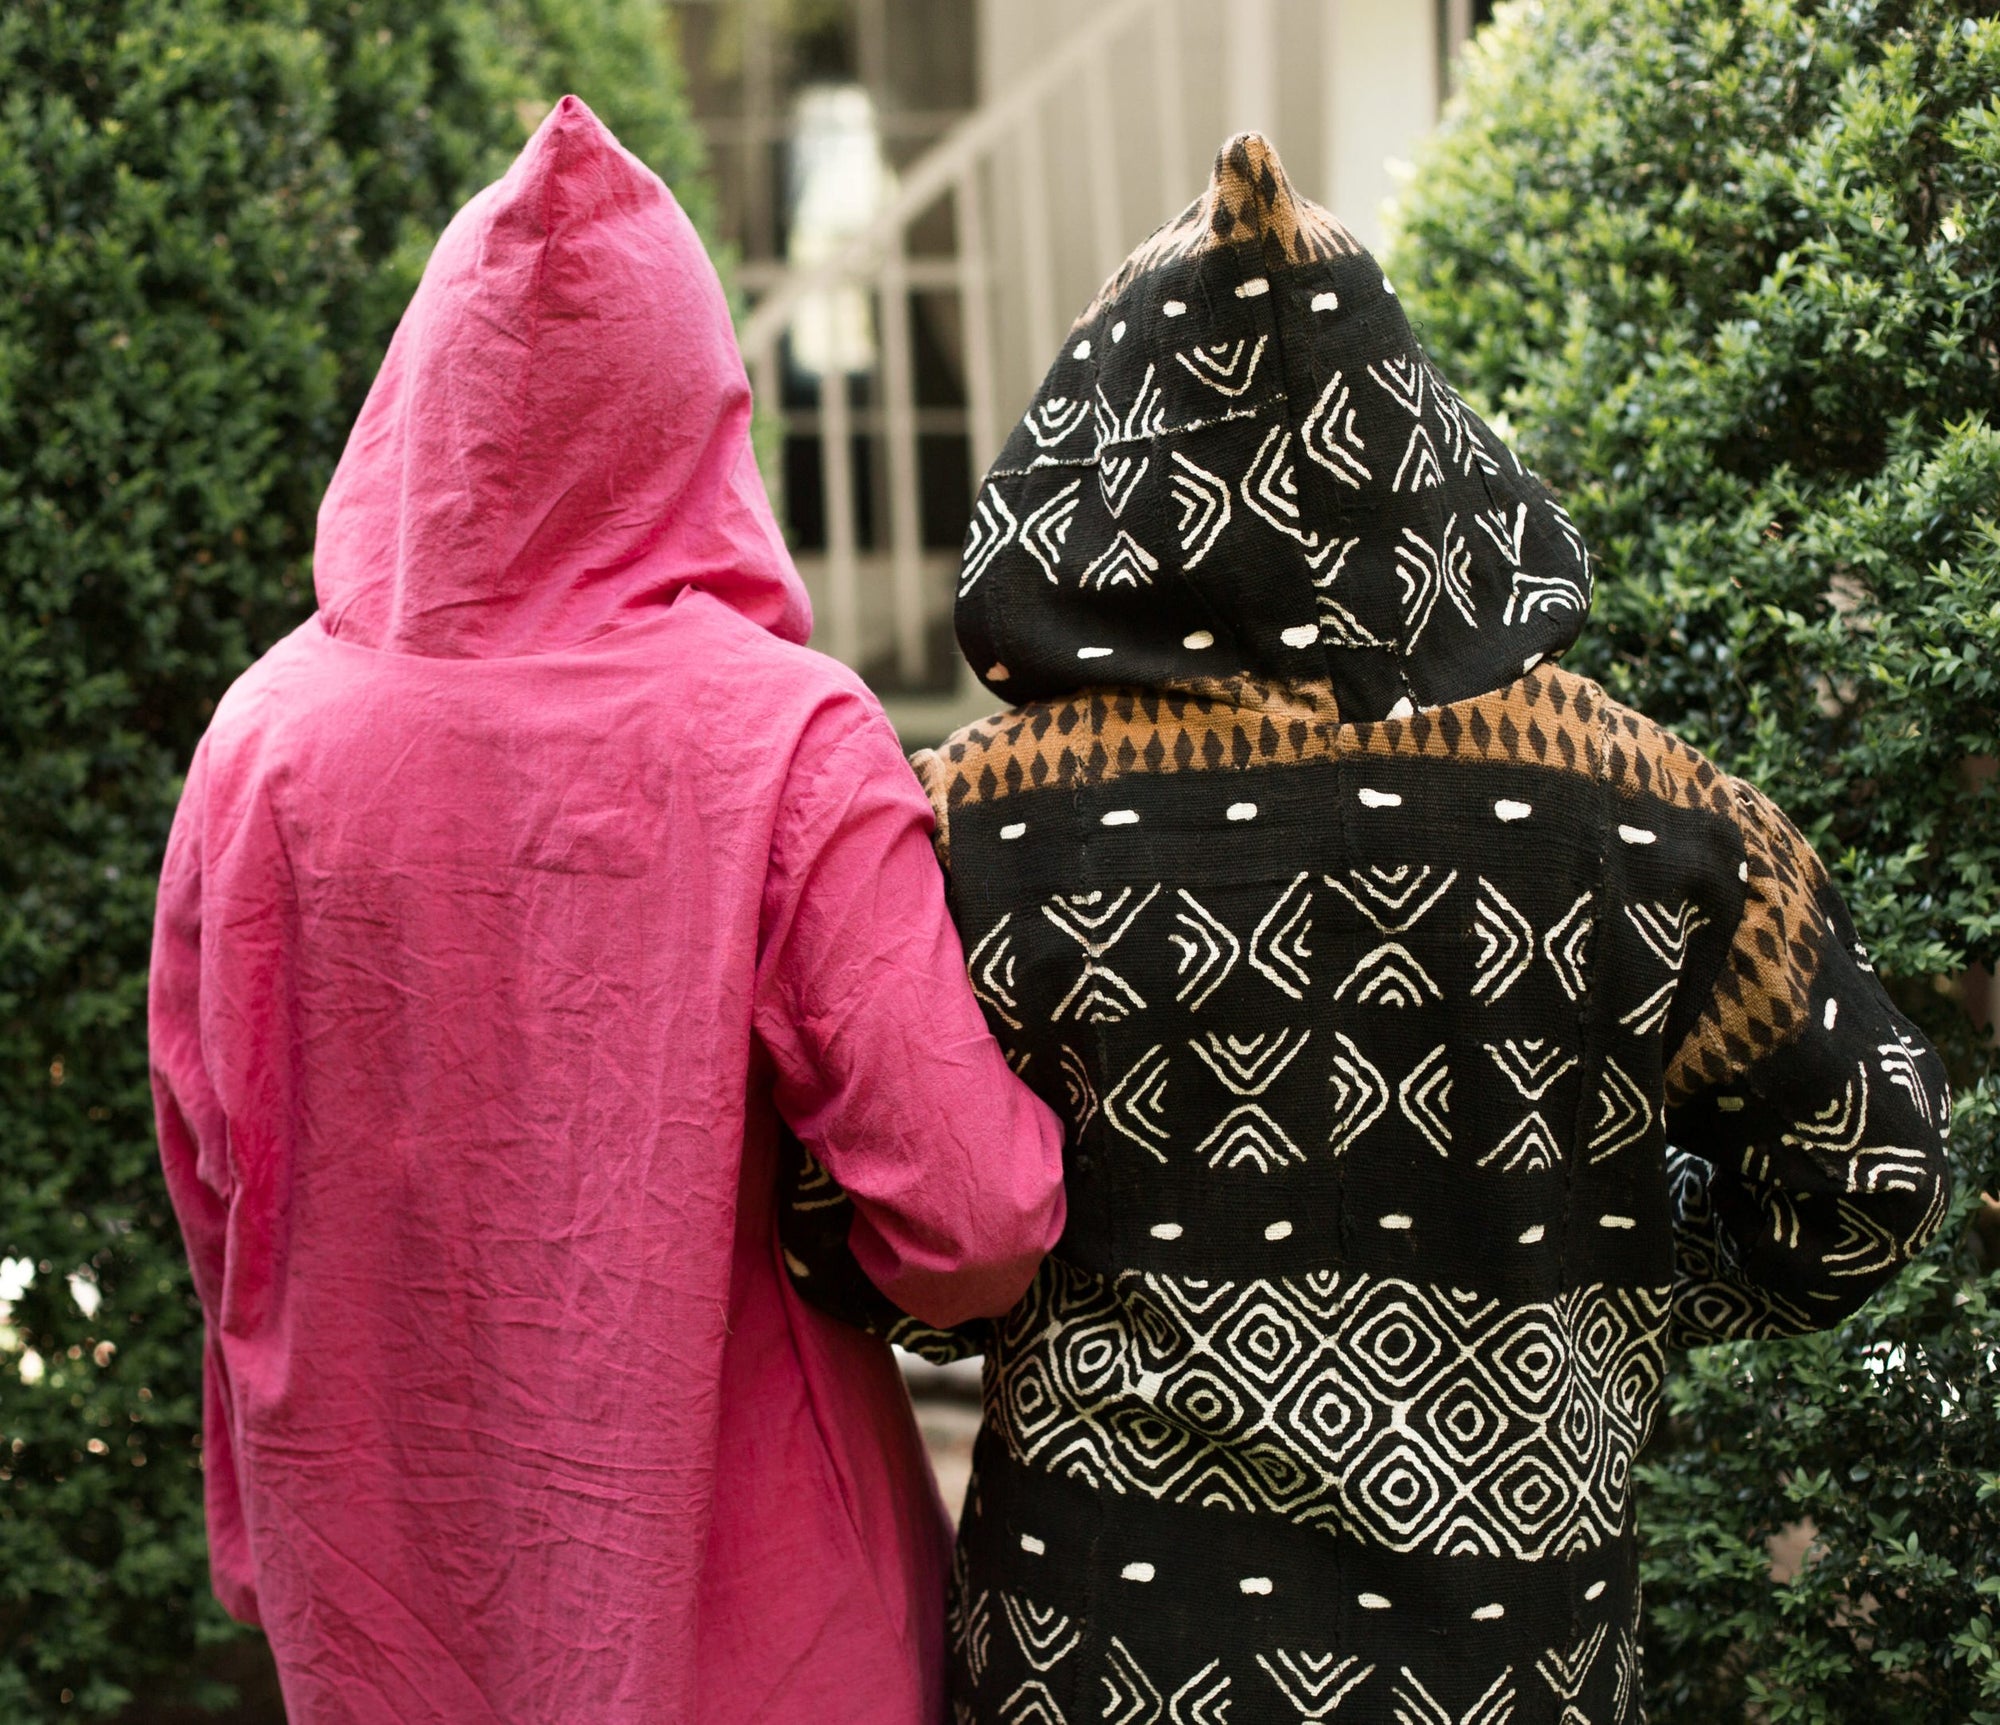 Back view of two women arms linked, surrounded by greenery wearing the Moroccan Djellaba with the hoods.